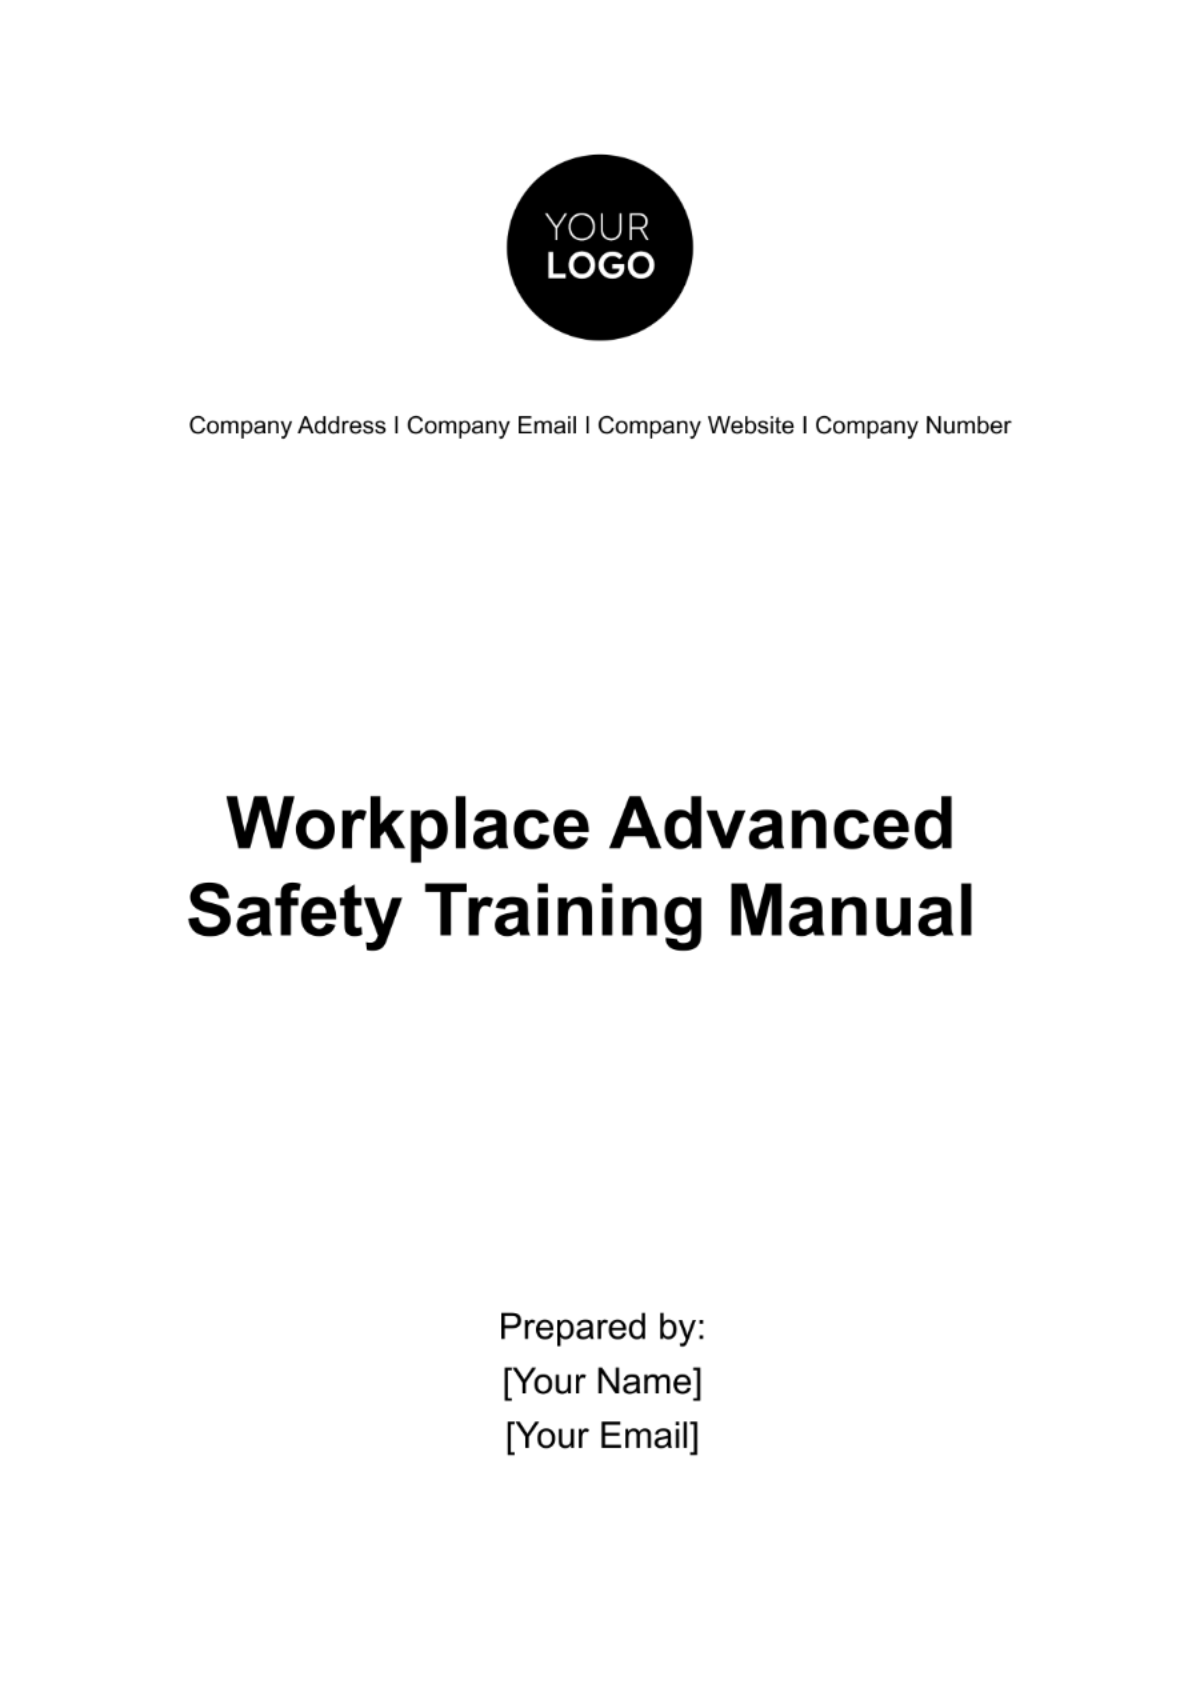 Free Workplace Advanced Safety Training Manual Template